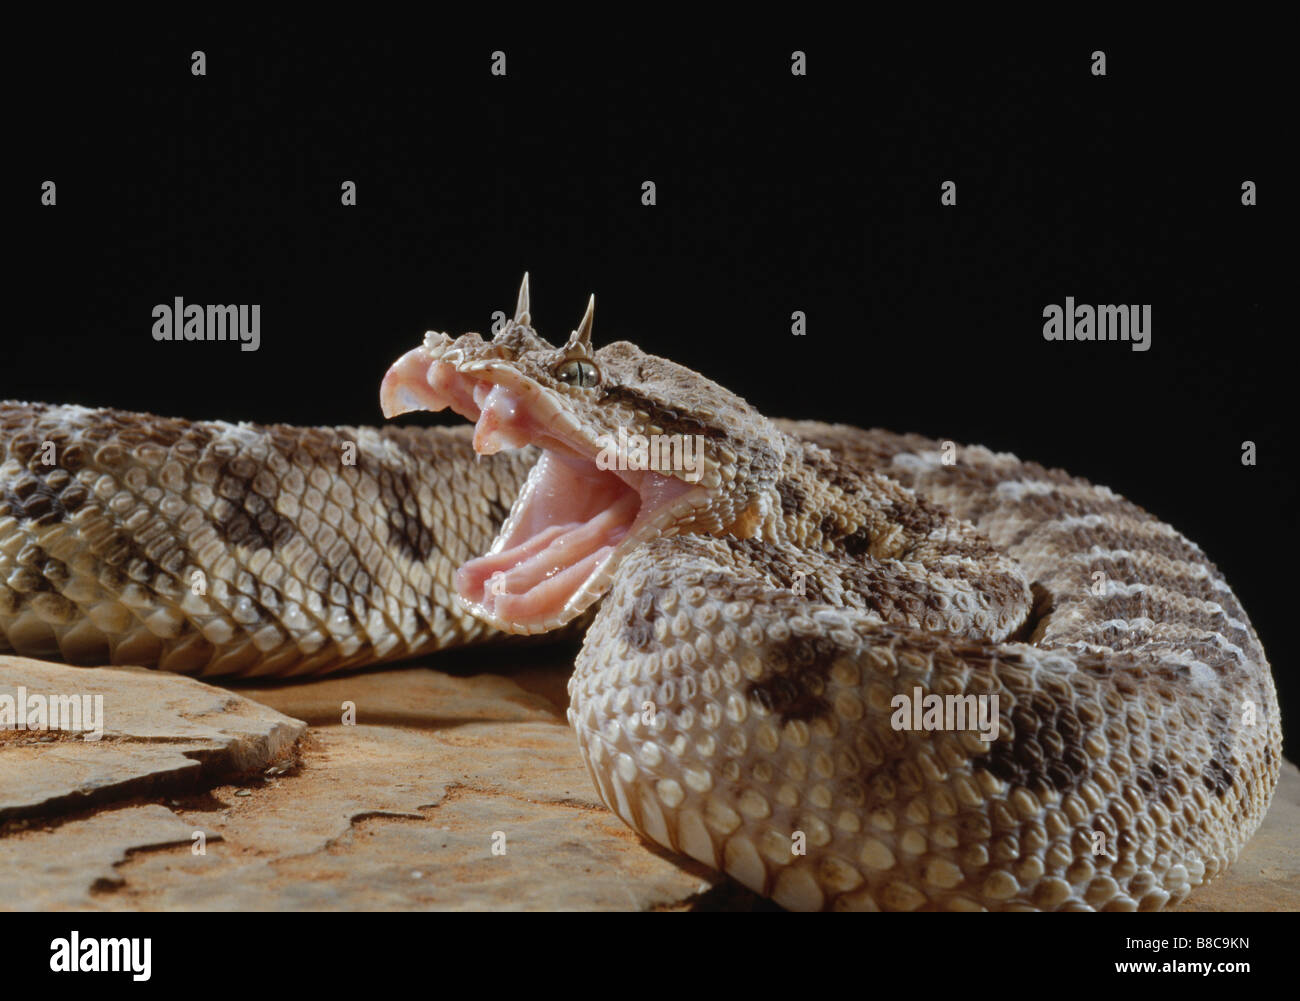 HORNED VIPER attack Stock Photo